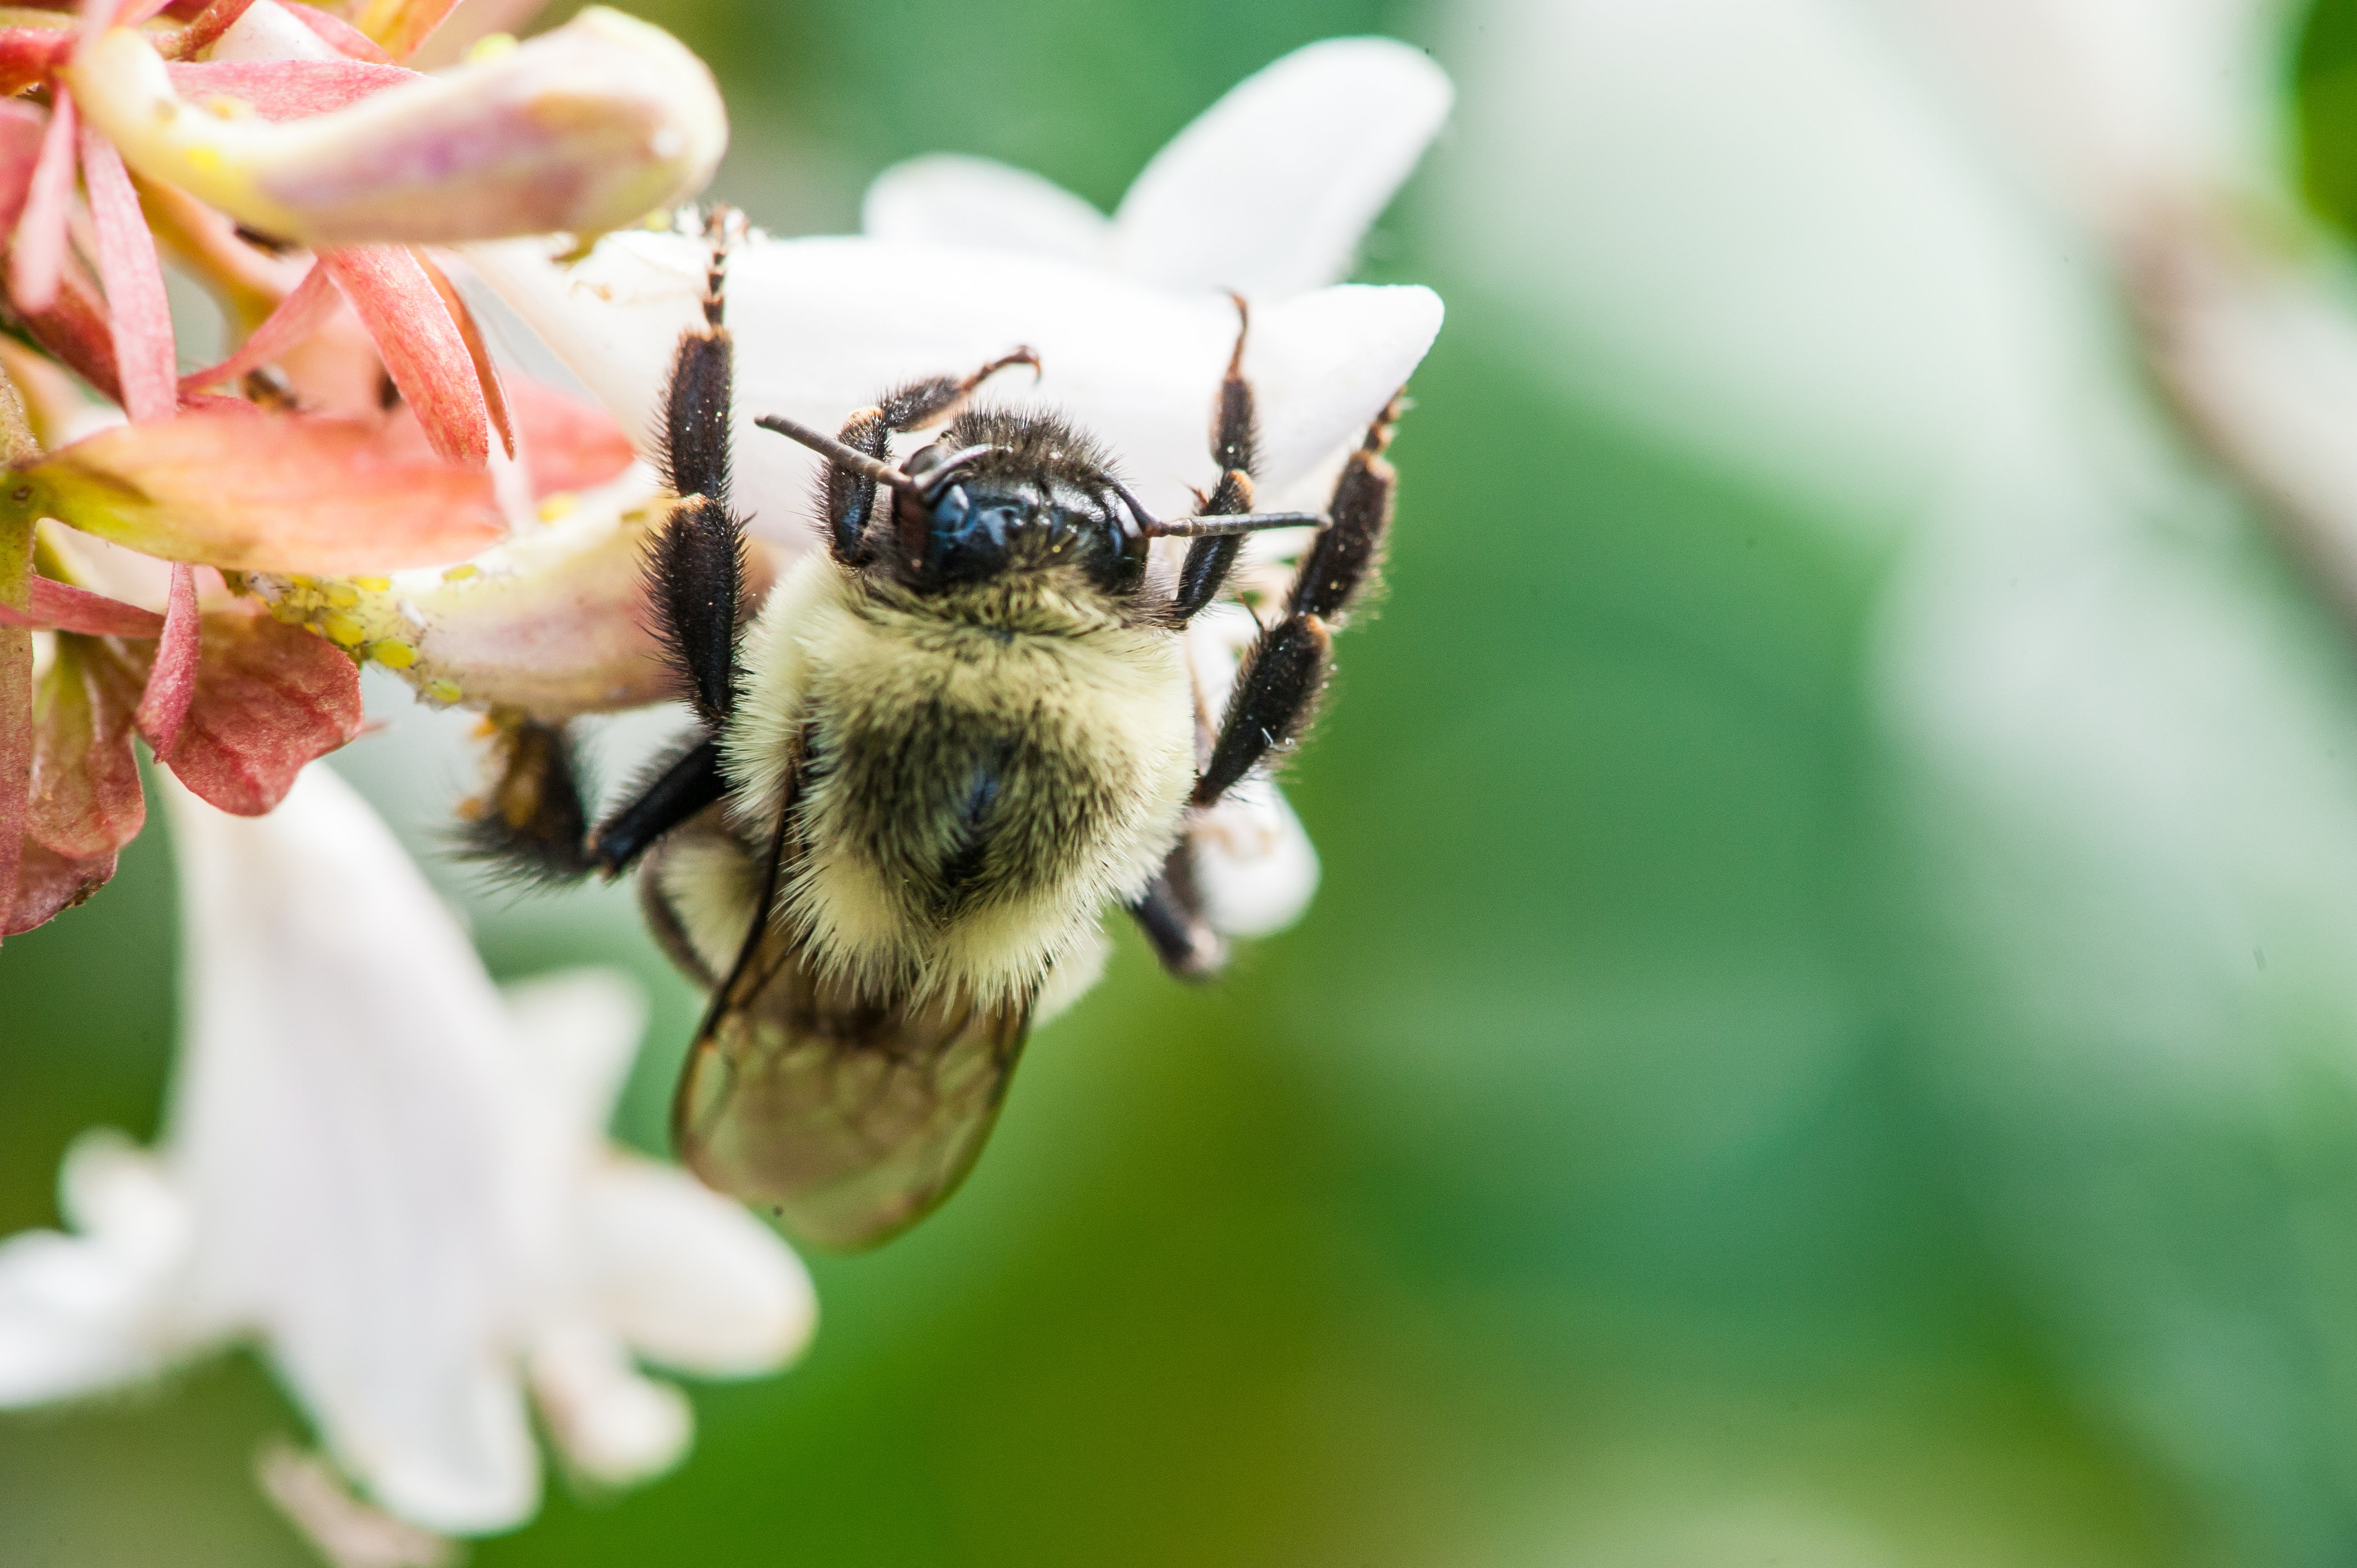 Cold-Tolerant Bumble Bees Focus of UA Research Effort